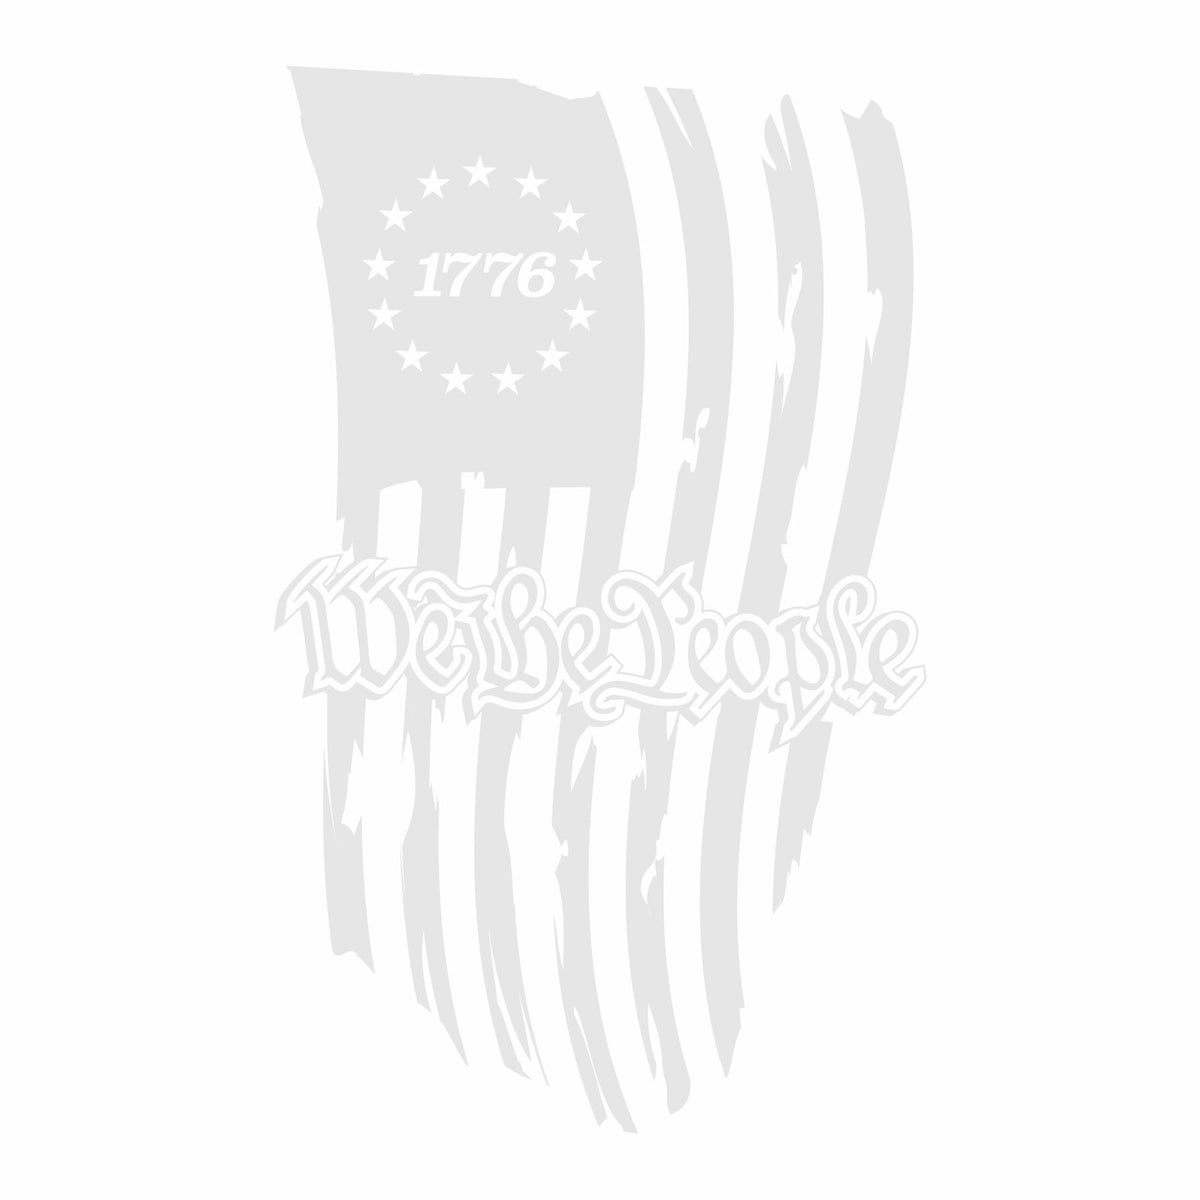 1776 Tattered Flag - We the People - PermaSticker - Free Shipping